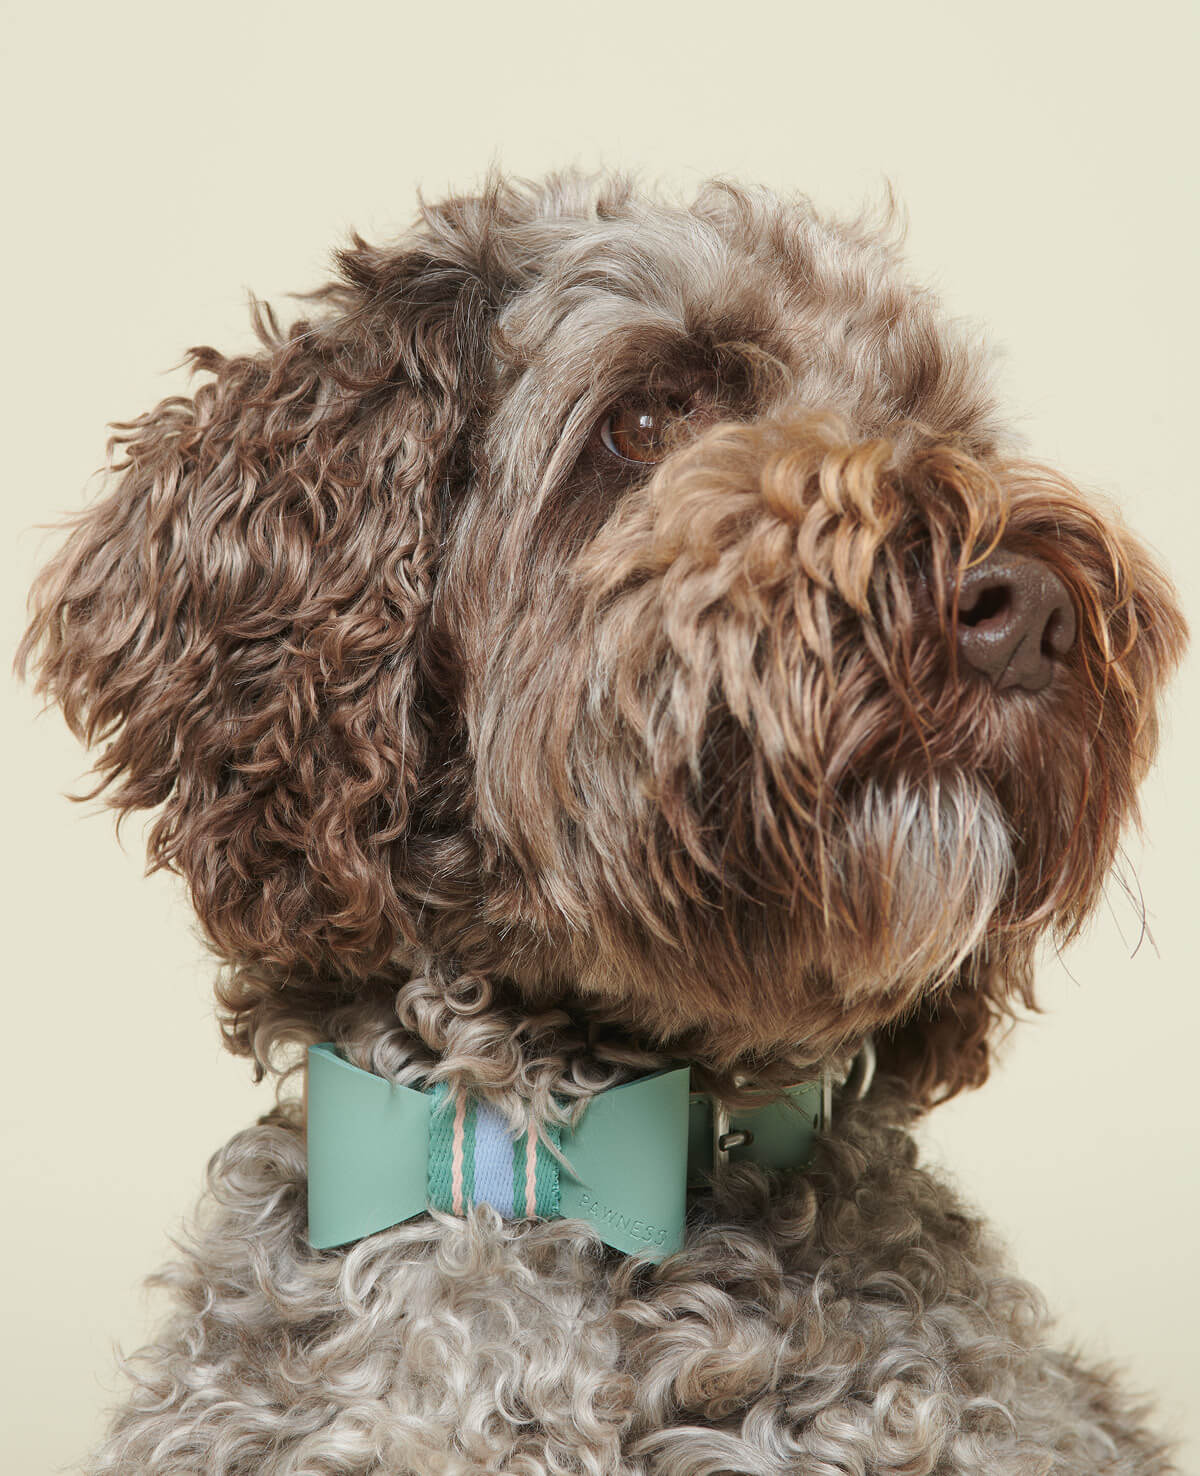 A dog with a blue bow tie around its neck, looking stylish and adorable.